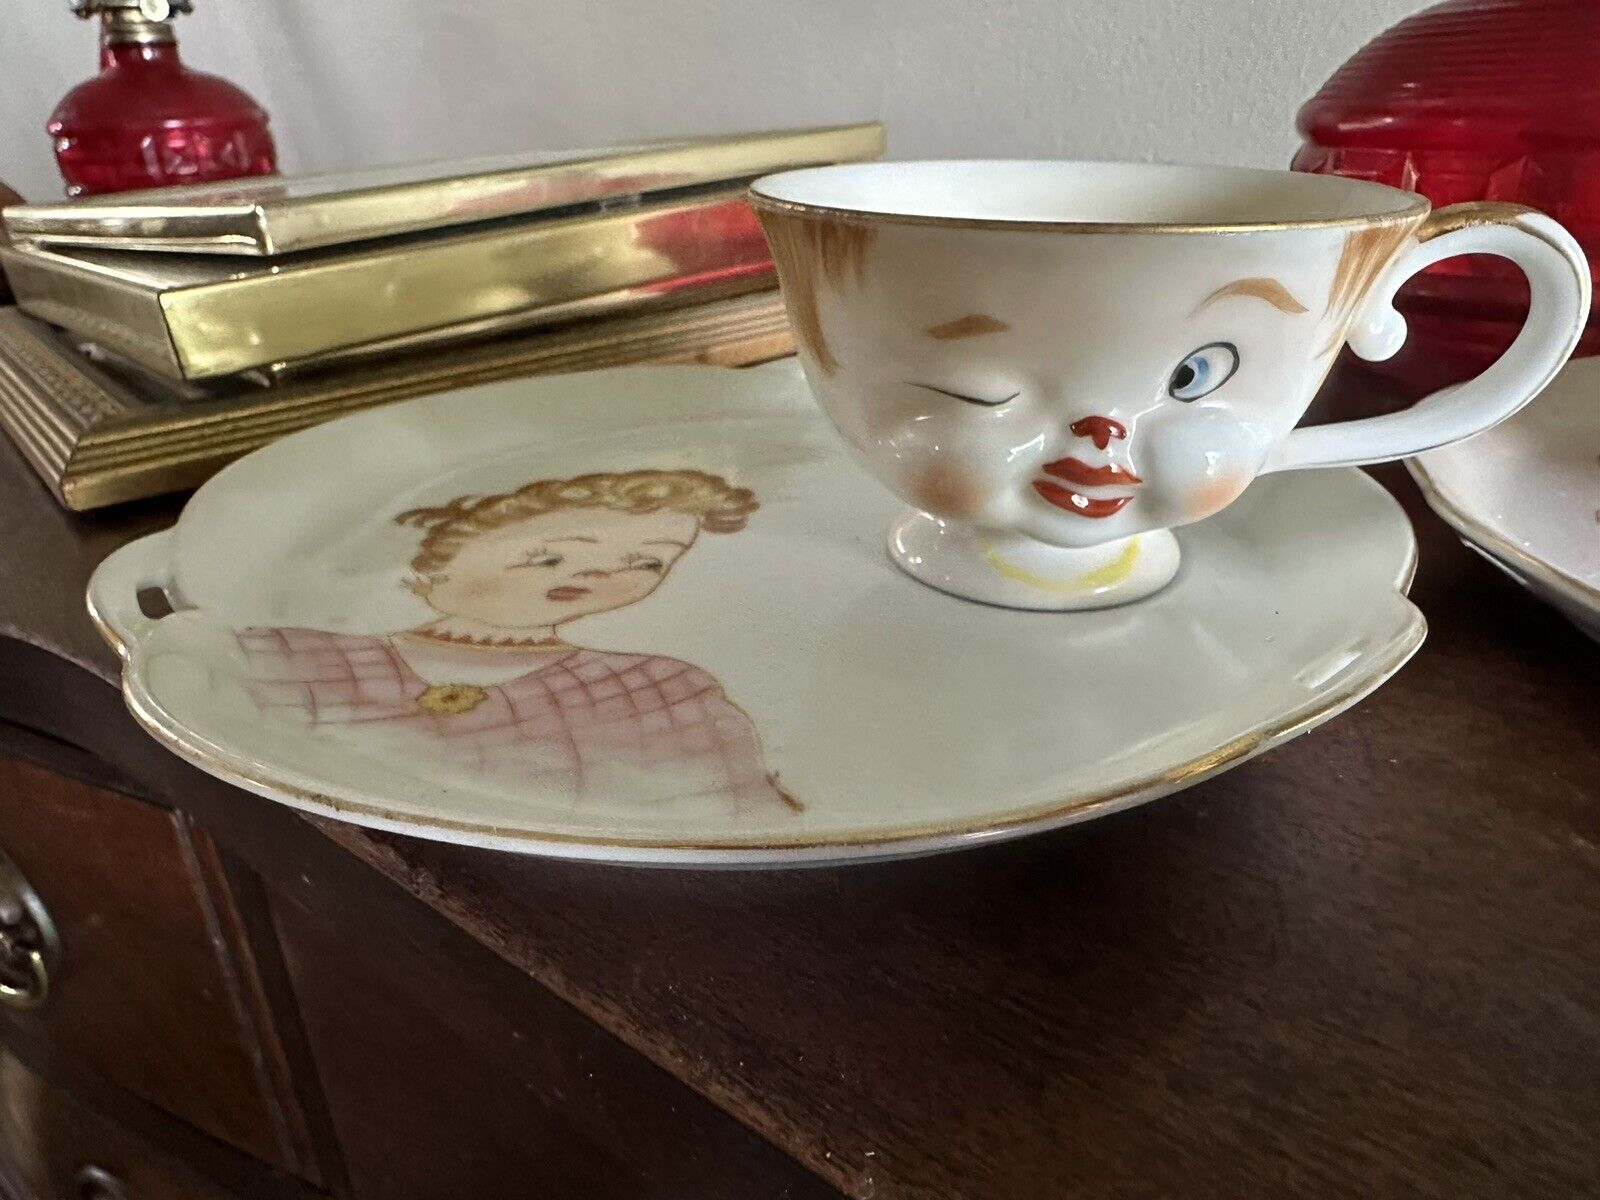 Antique Wink Face Tea Cups And Plates/ His And Hers